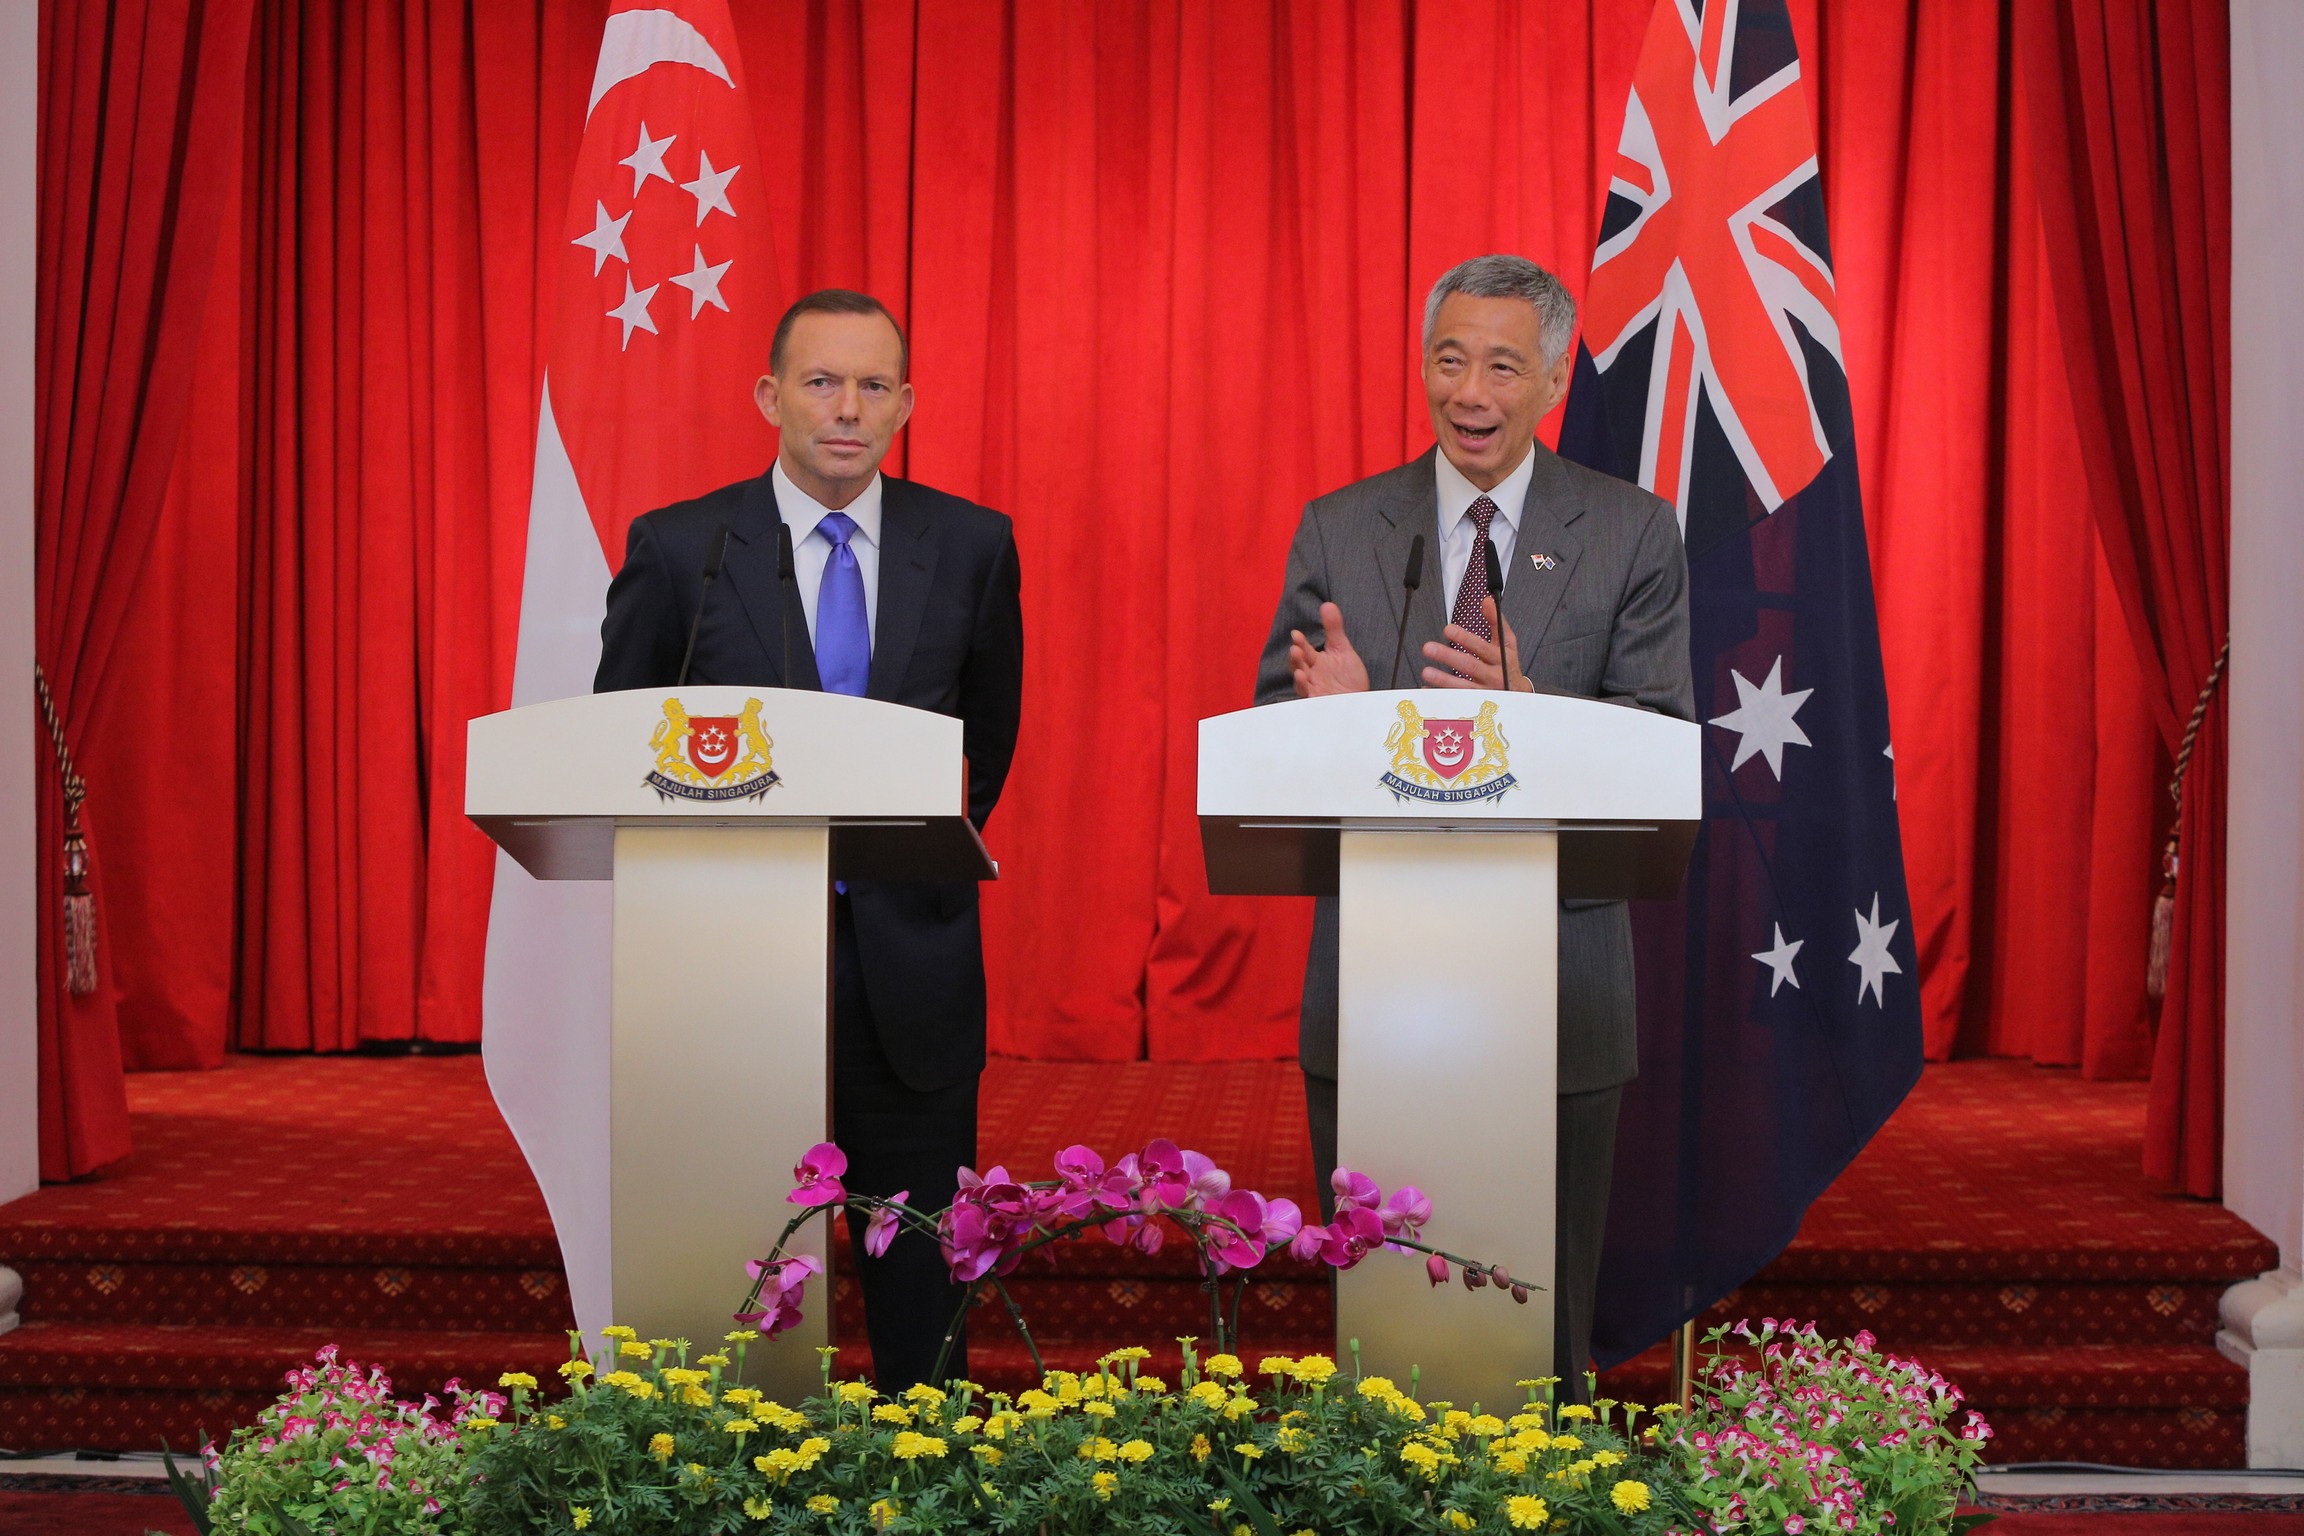 Q&A at the Joint Press Conference with Australian PM, Tony Abbott